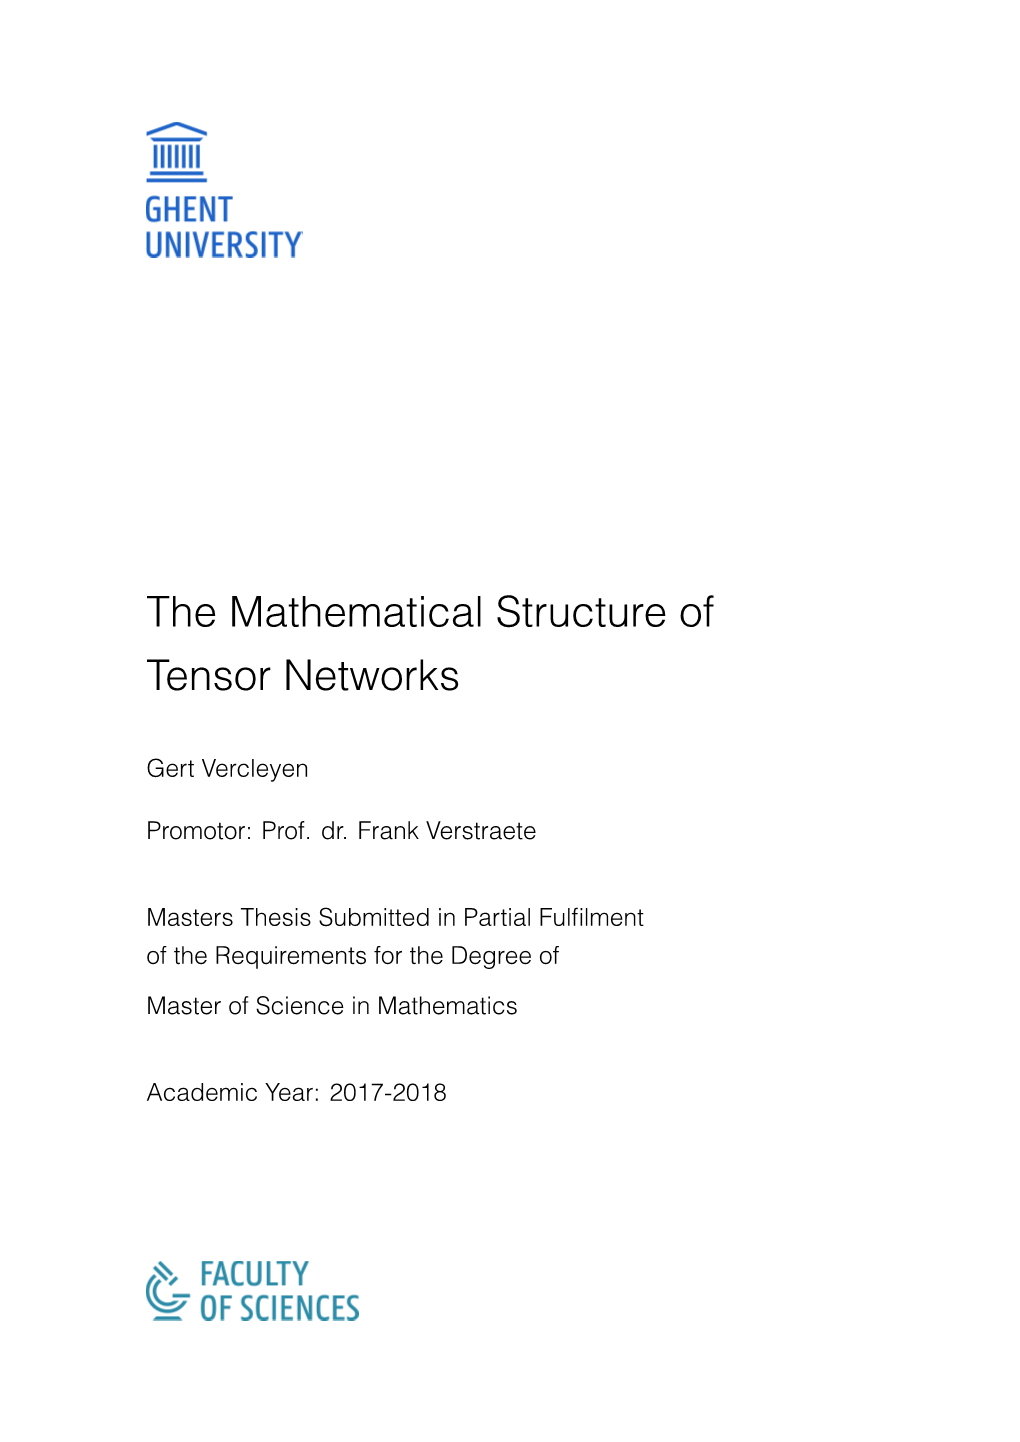 The Mathematical Structure of Tensor Networks